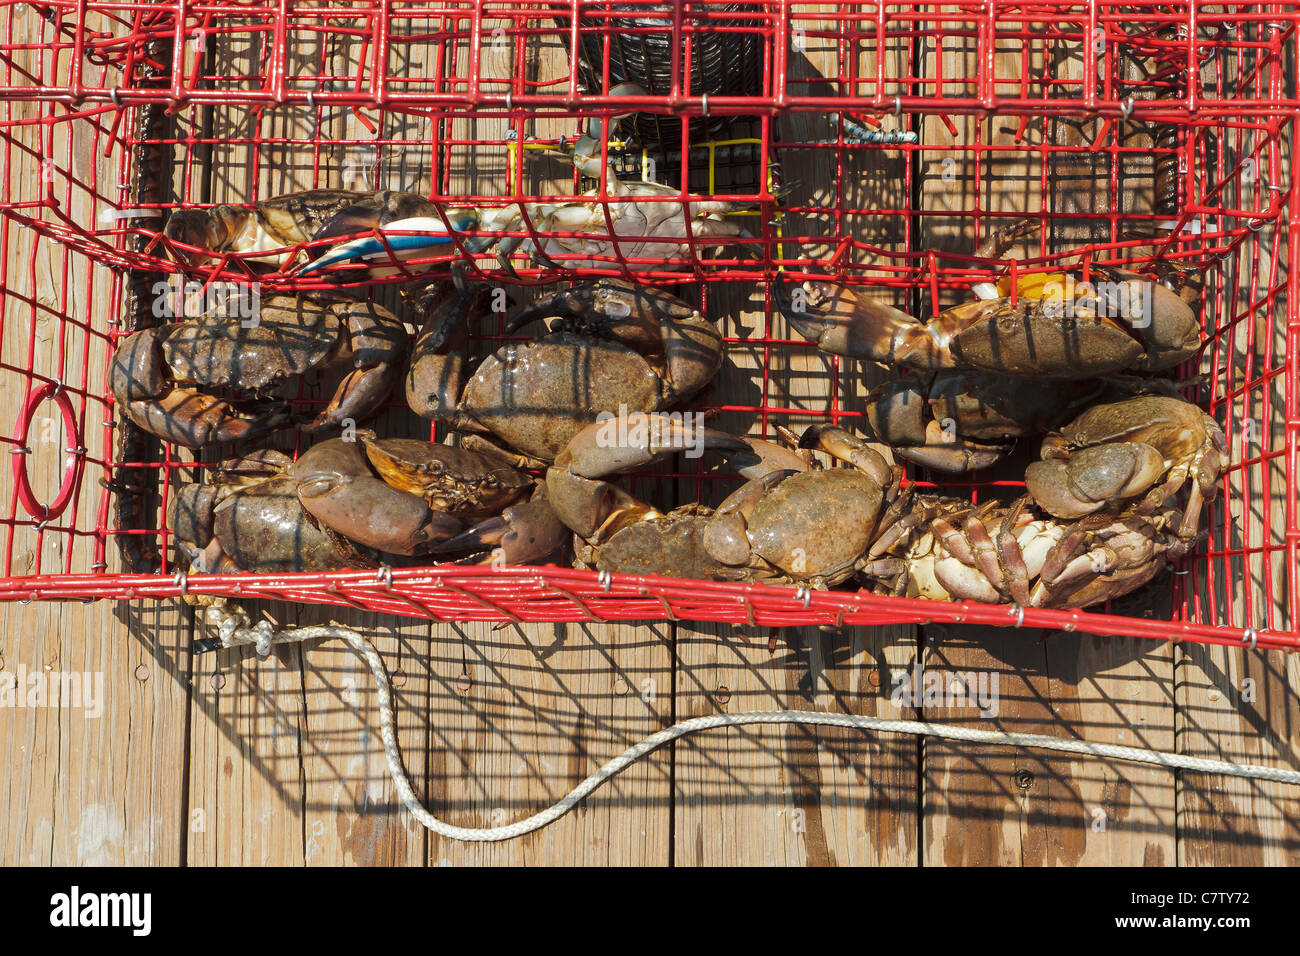 Harvested stone and blue crabs in a crab trap baited and set in